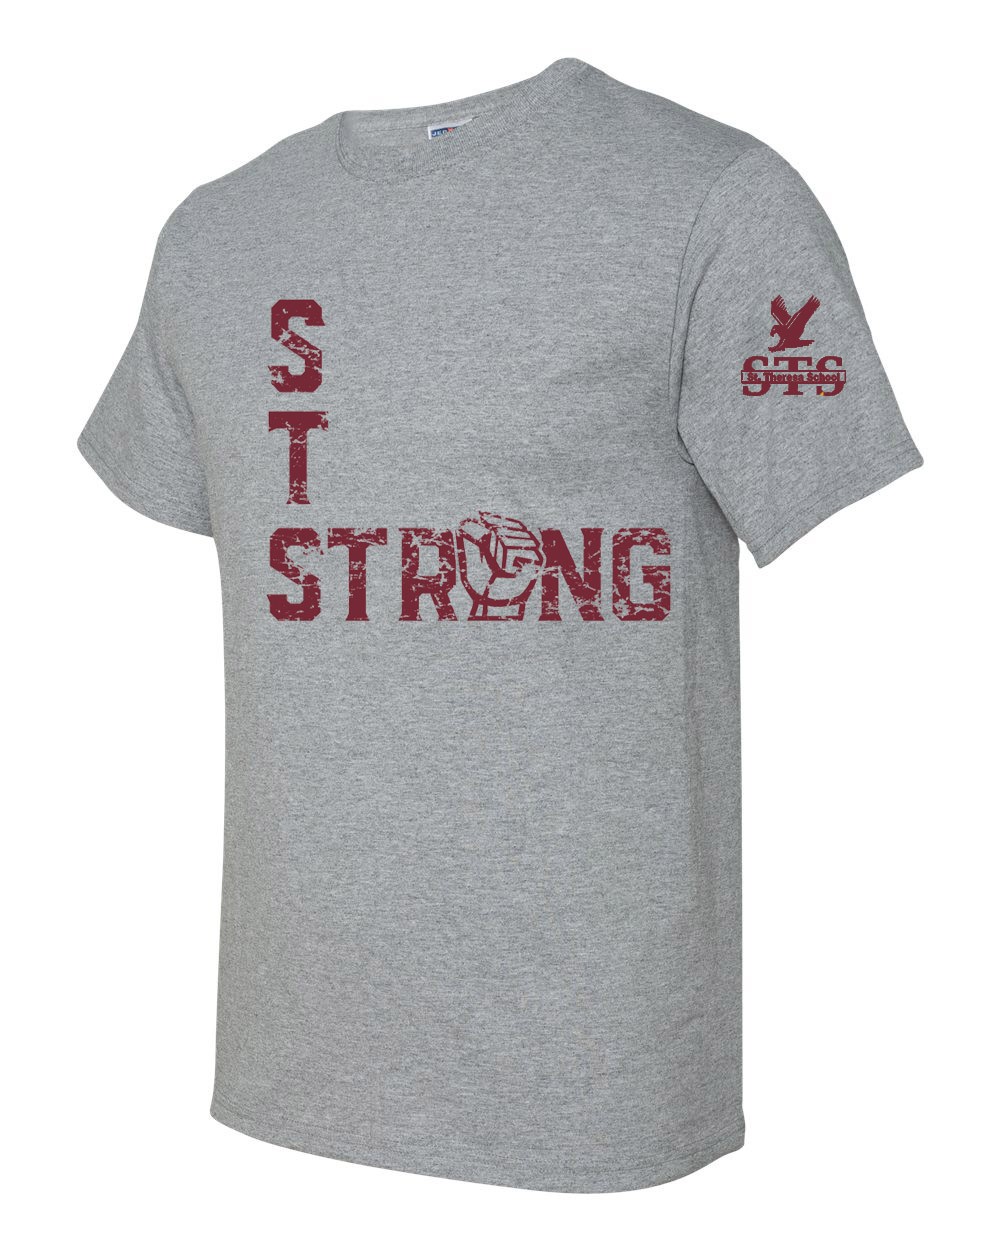 STS Staff Fist S/S Spirit T-Shirt w/ Maroon Logo - Please Allow 2-3 Weeks for Delivery